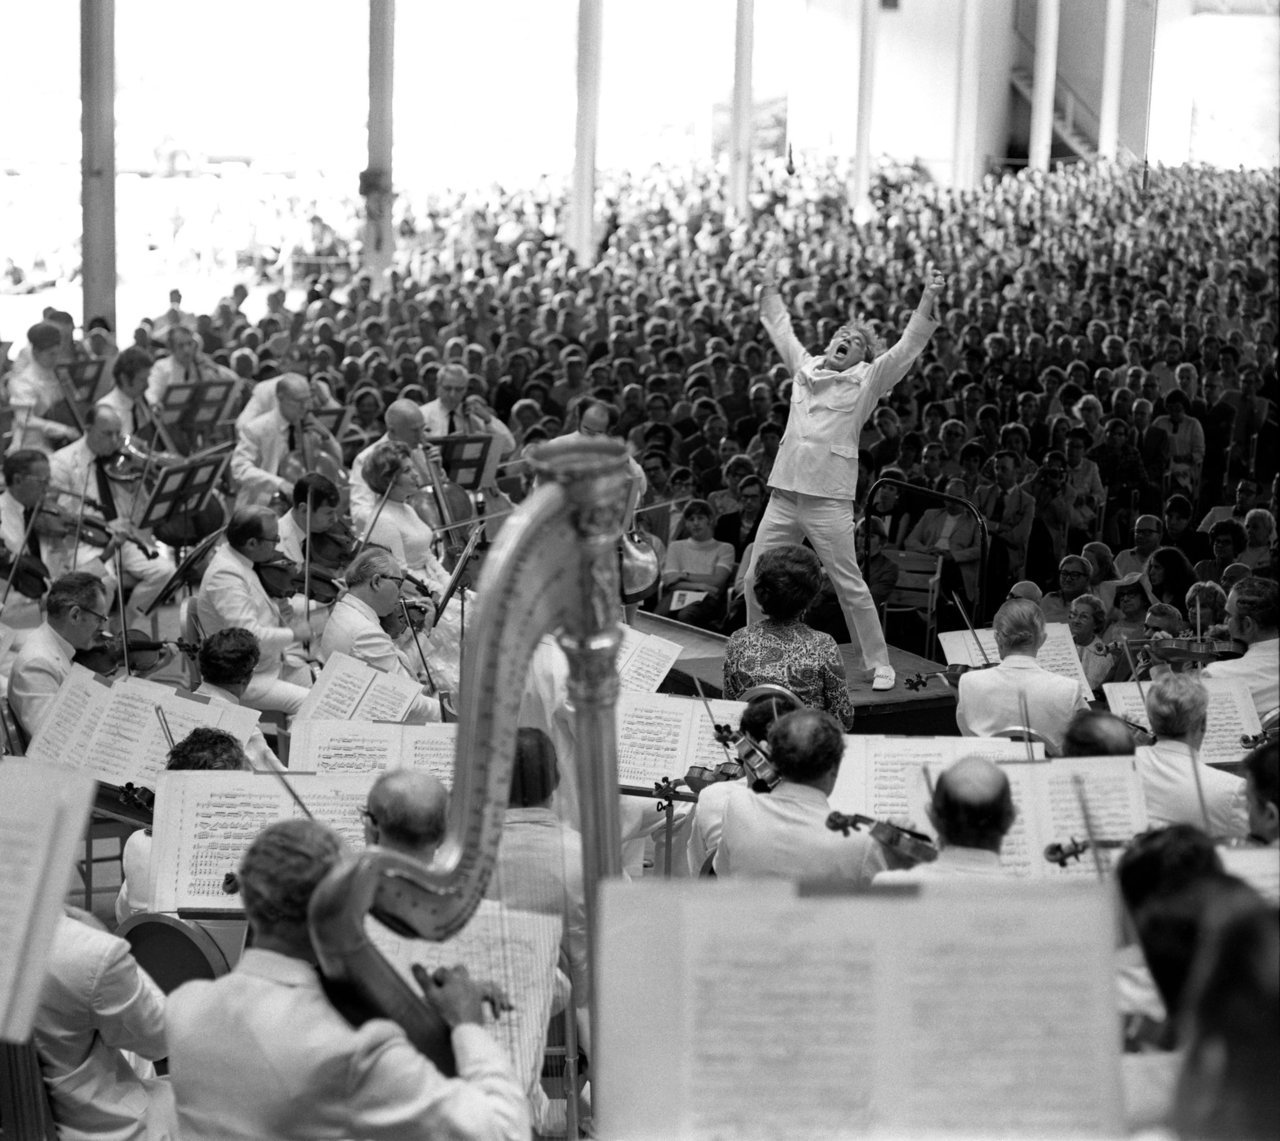 le-narrateur:“Leonard Bernstein conducting the Boston Symphony Orchestra in Mahler’s Symphony No. 2, in Lenox, Mass., in July 1970 ”